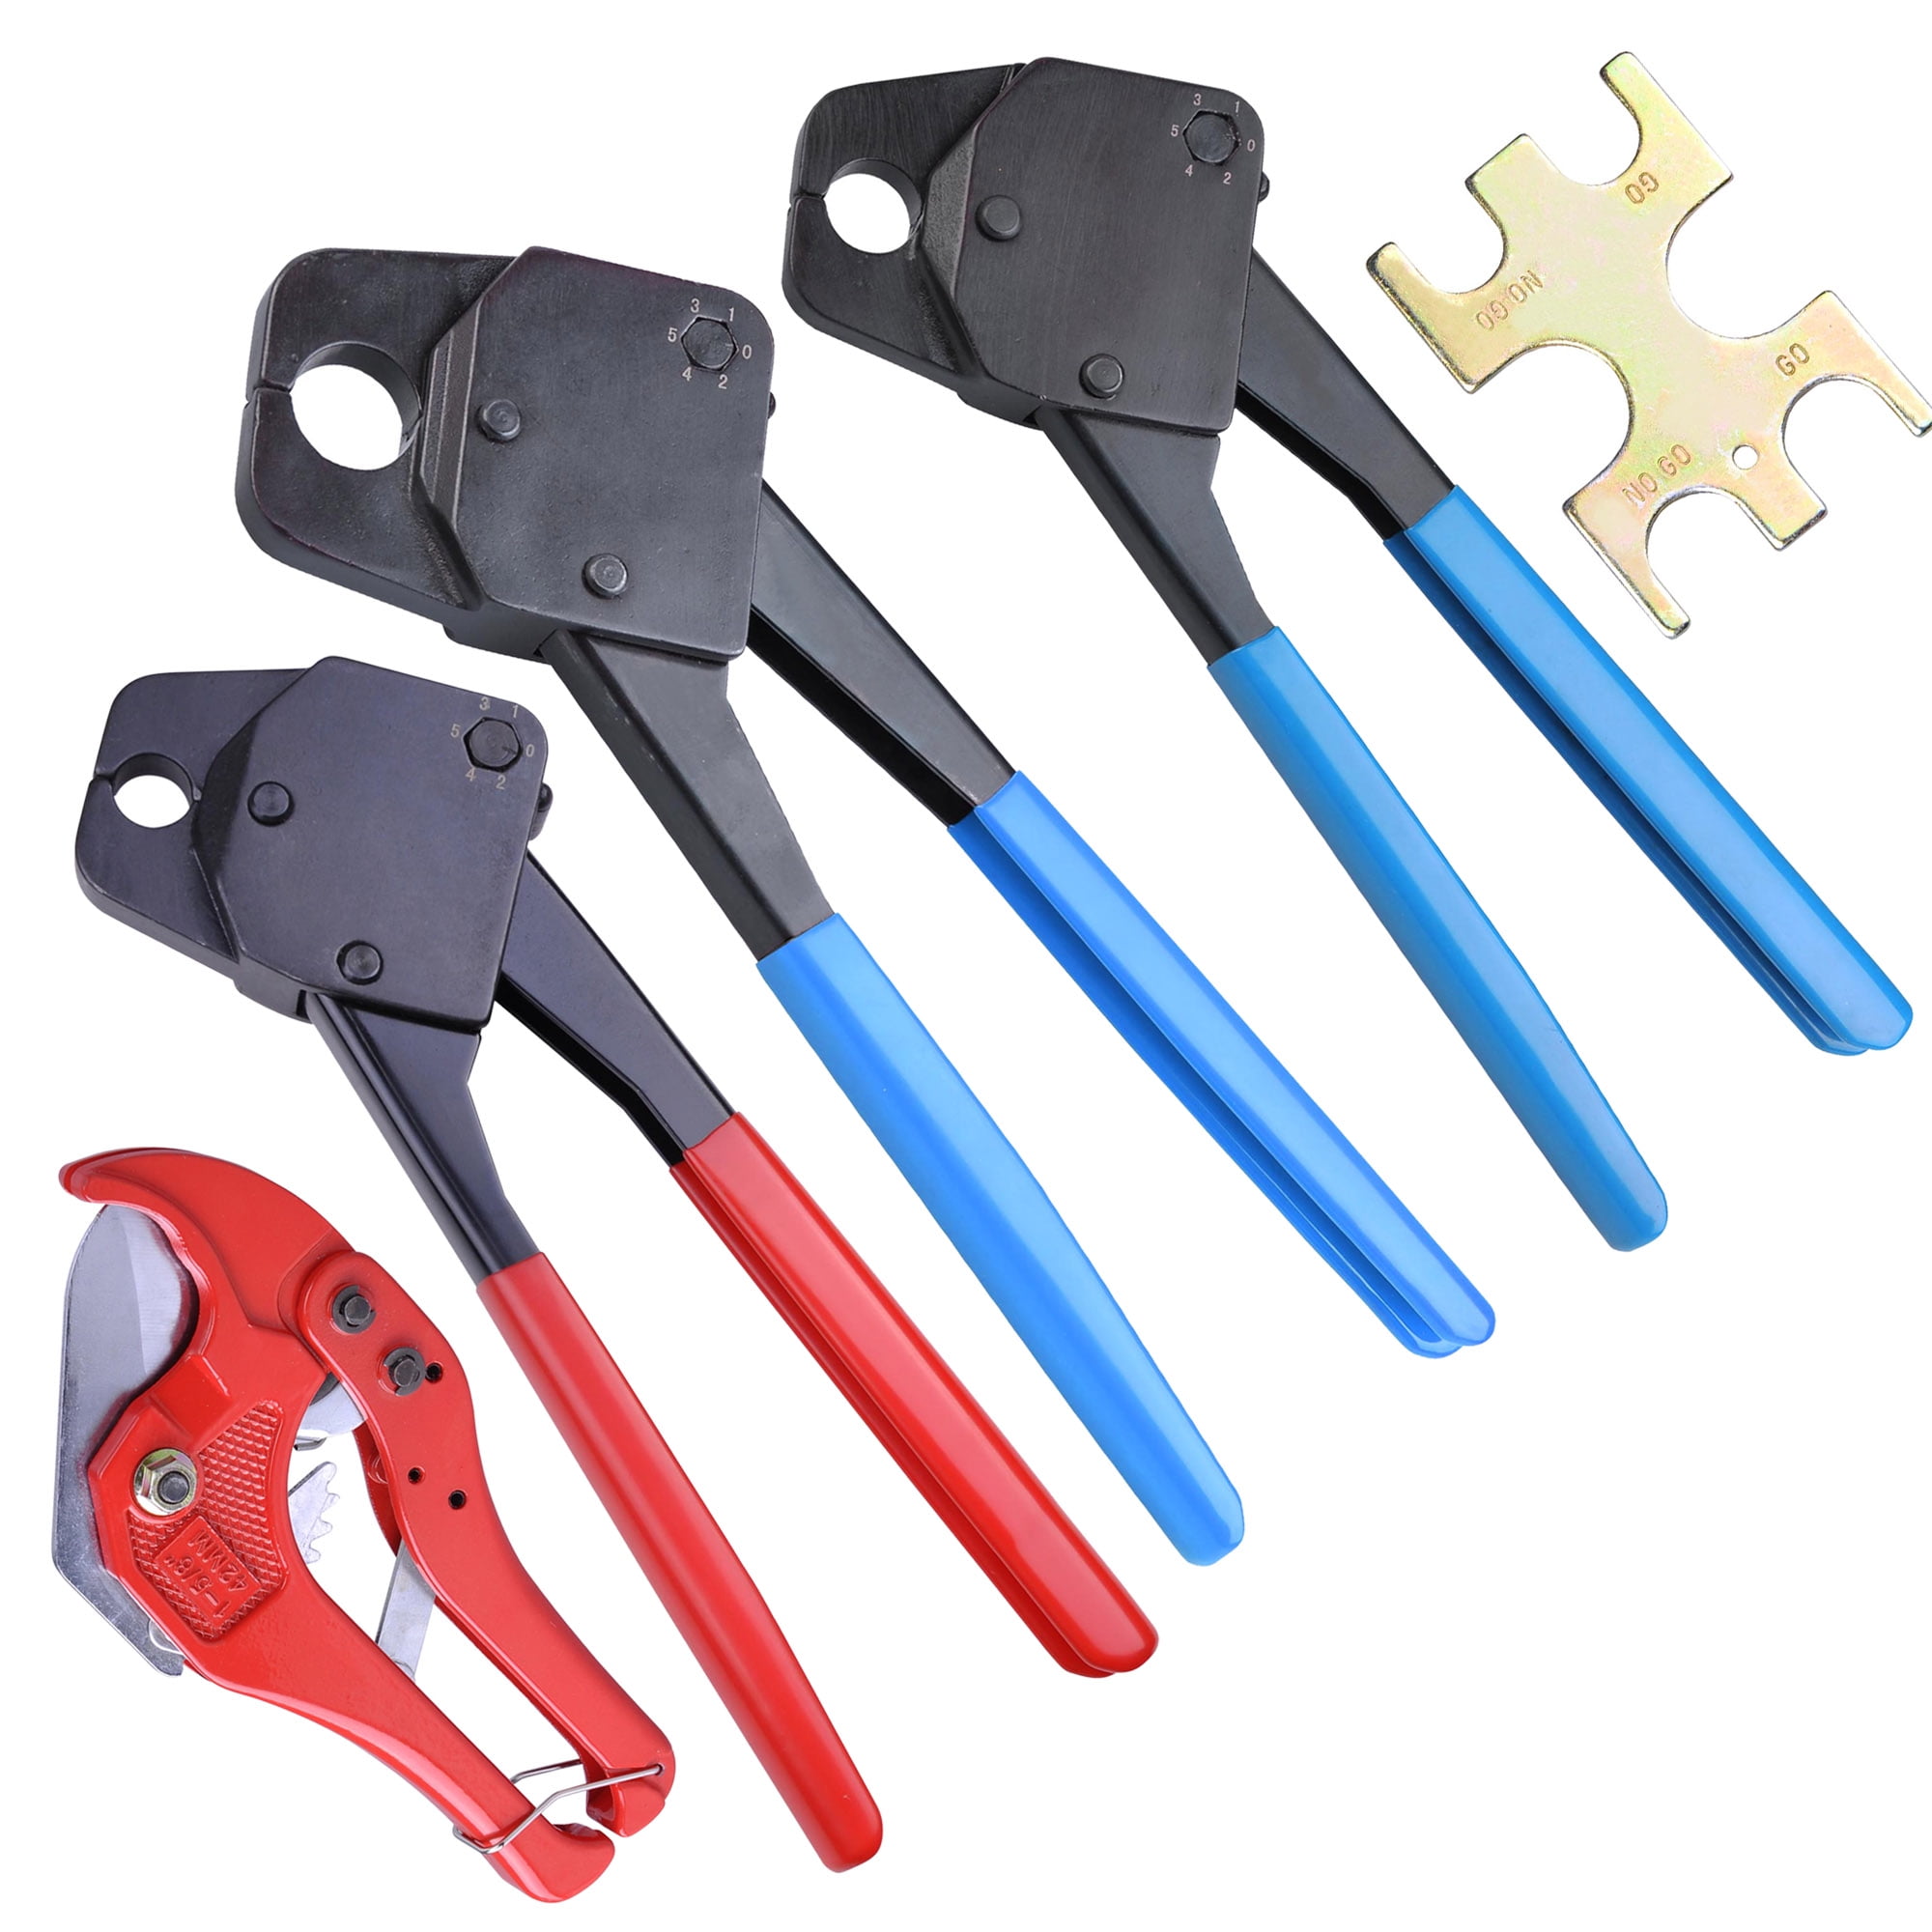 IWISS Combo Angle Head PEX Pipe Crimping Tool Kits Used for 1/2" & 3/4" Pex 